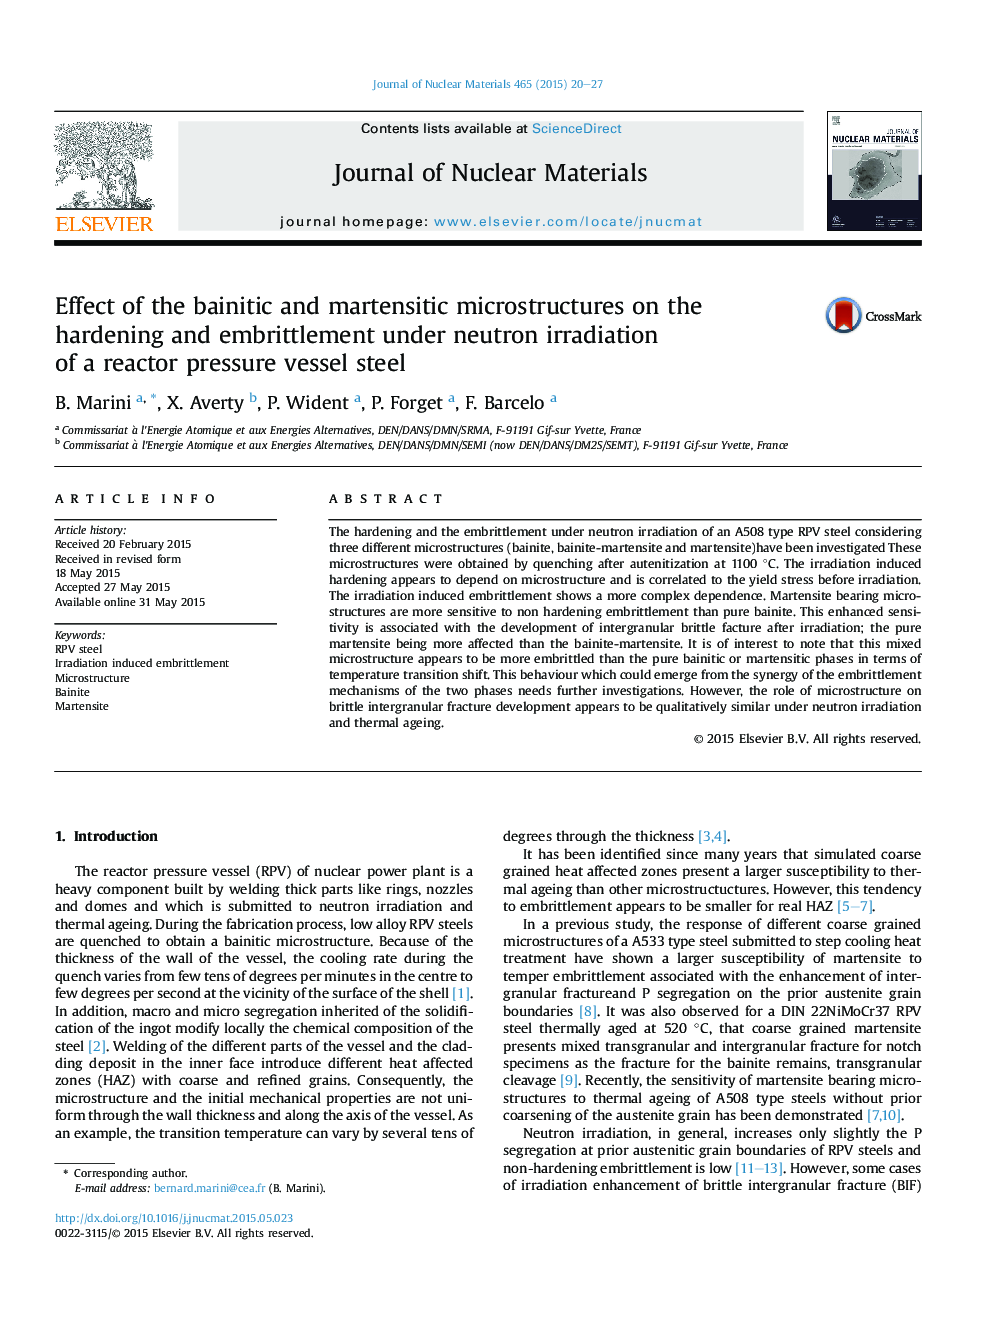 Effect of the bainitic and martensitic microstructures on the hardening and embrittlement under neutron irradiation of a reactor pressure vessel steel